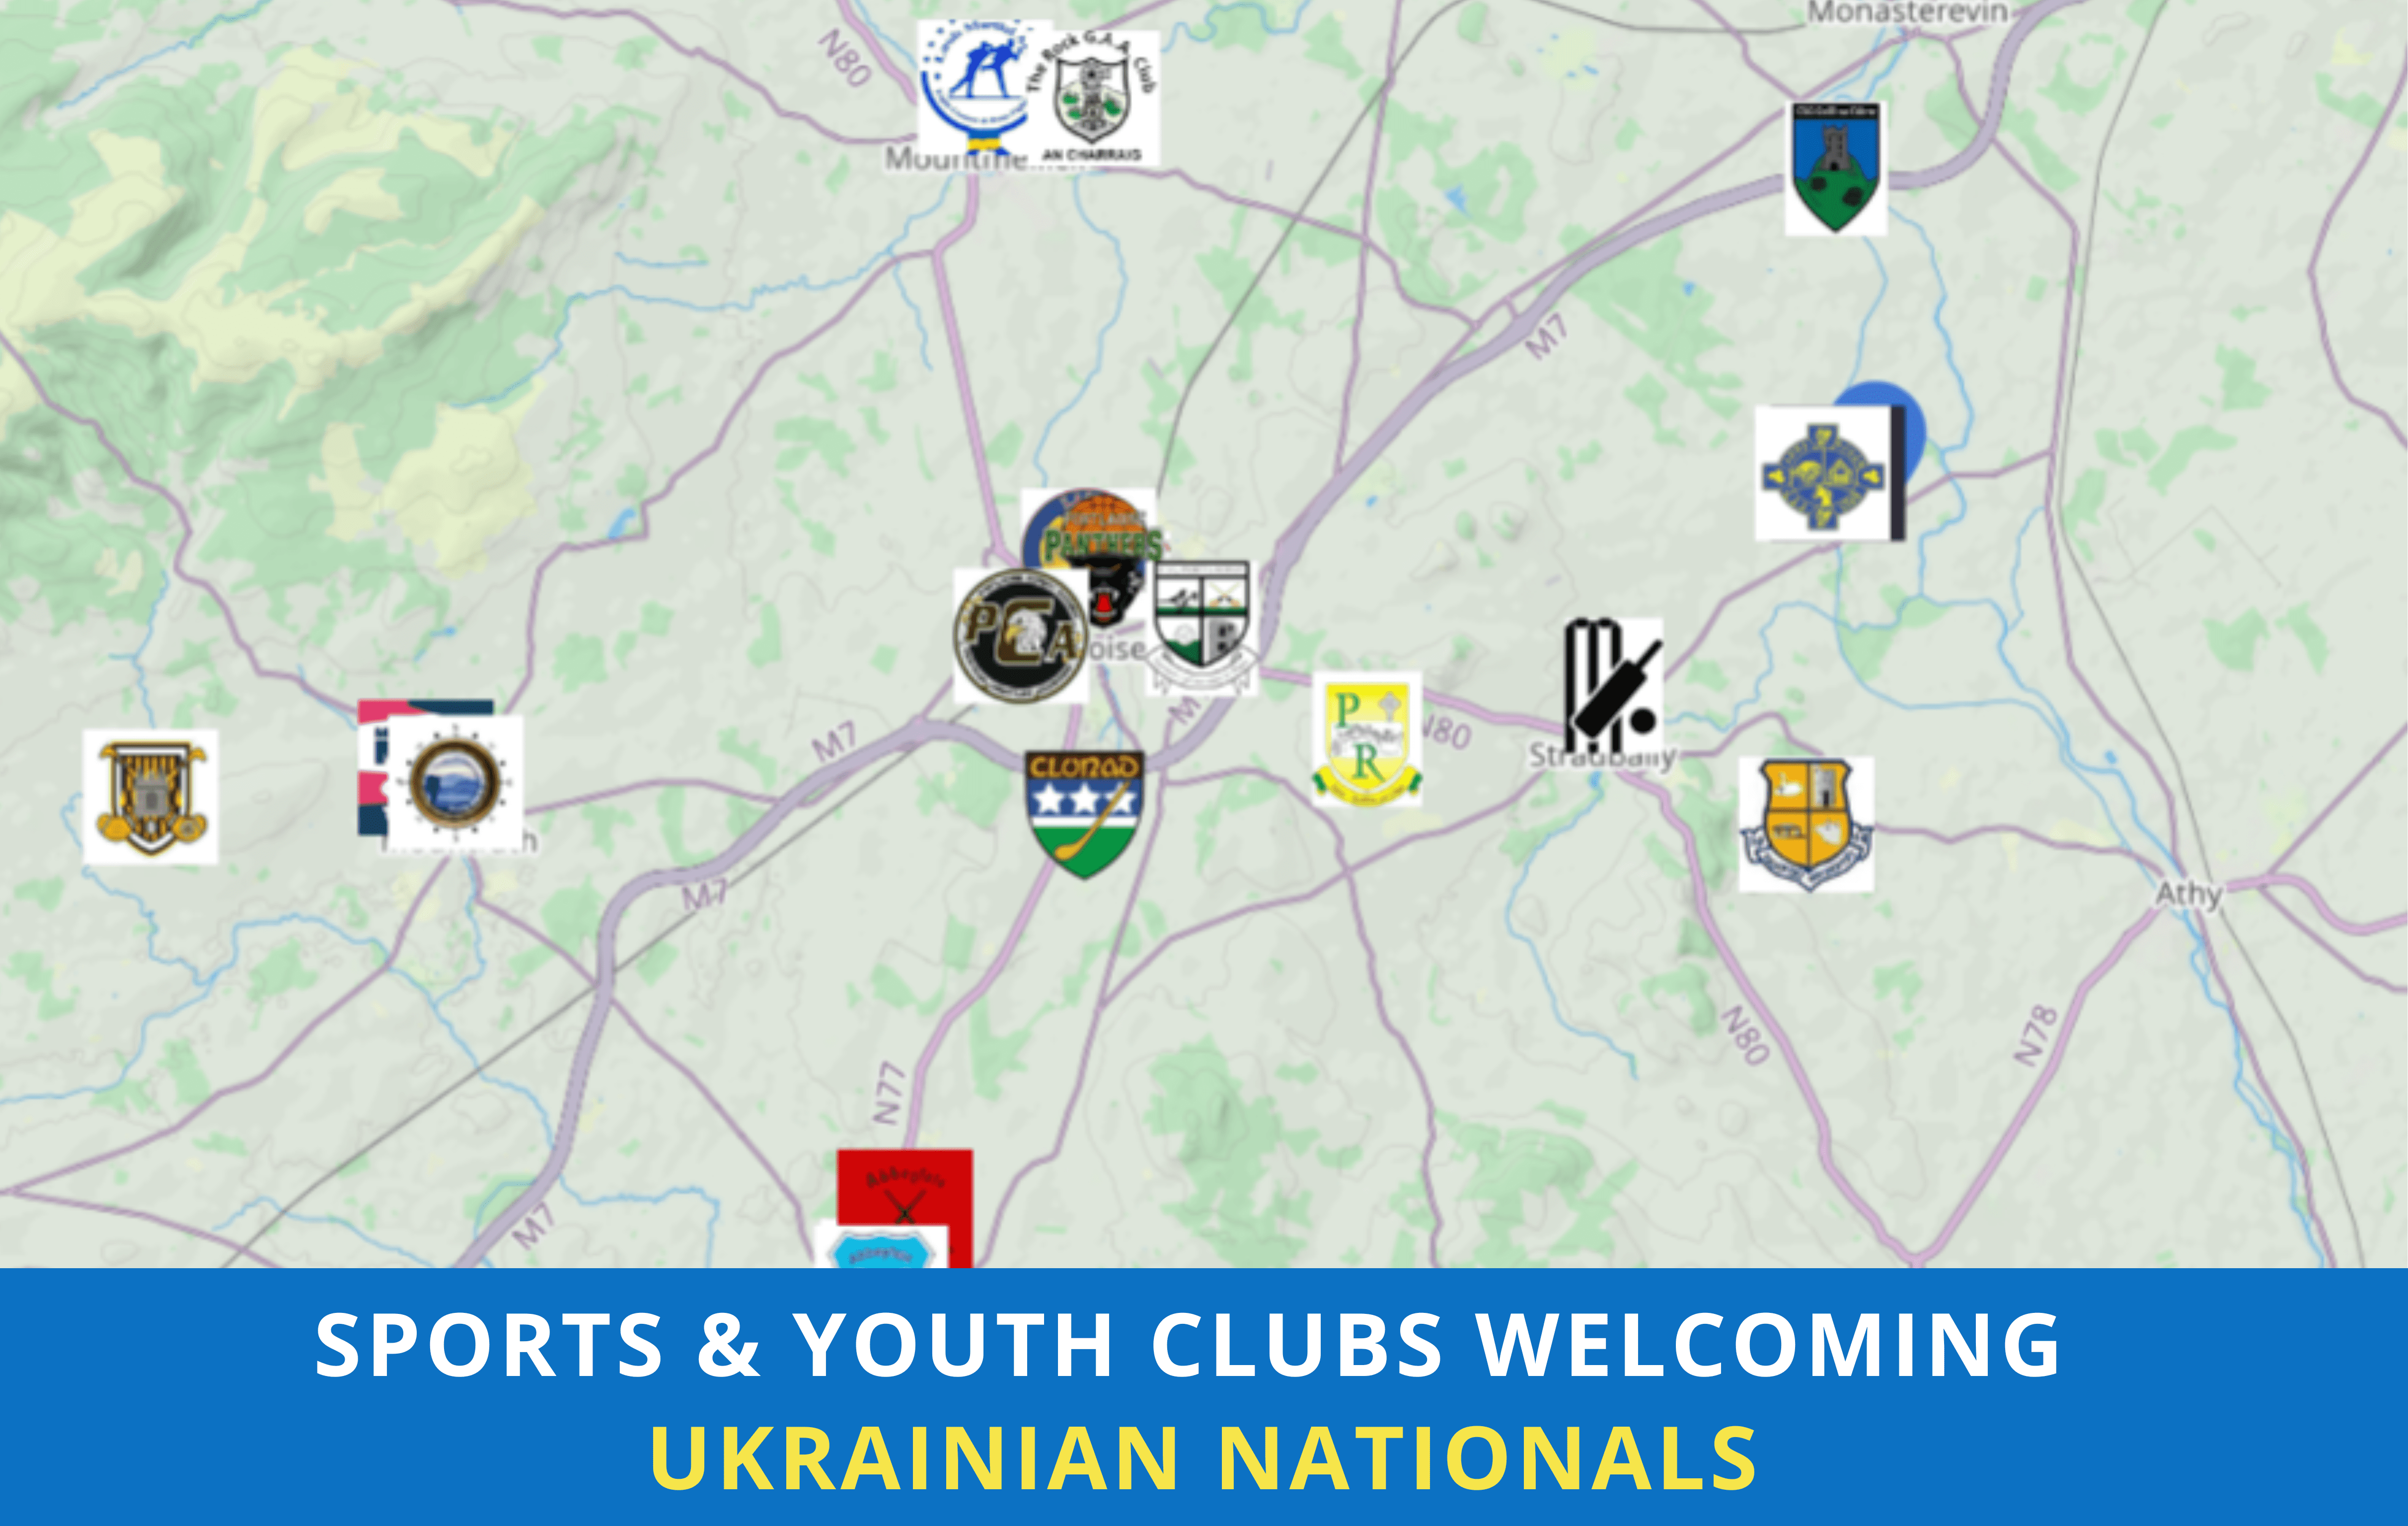 Map of Sports & Youth Clubs welcoming Ukrainian Nationals